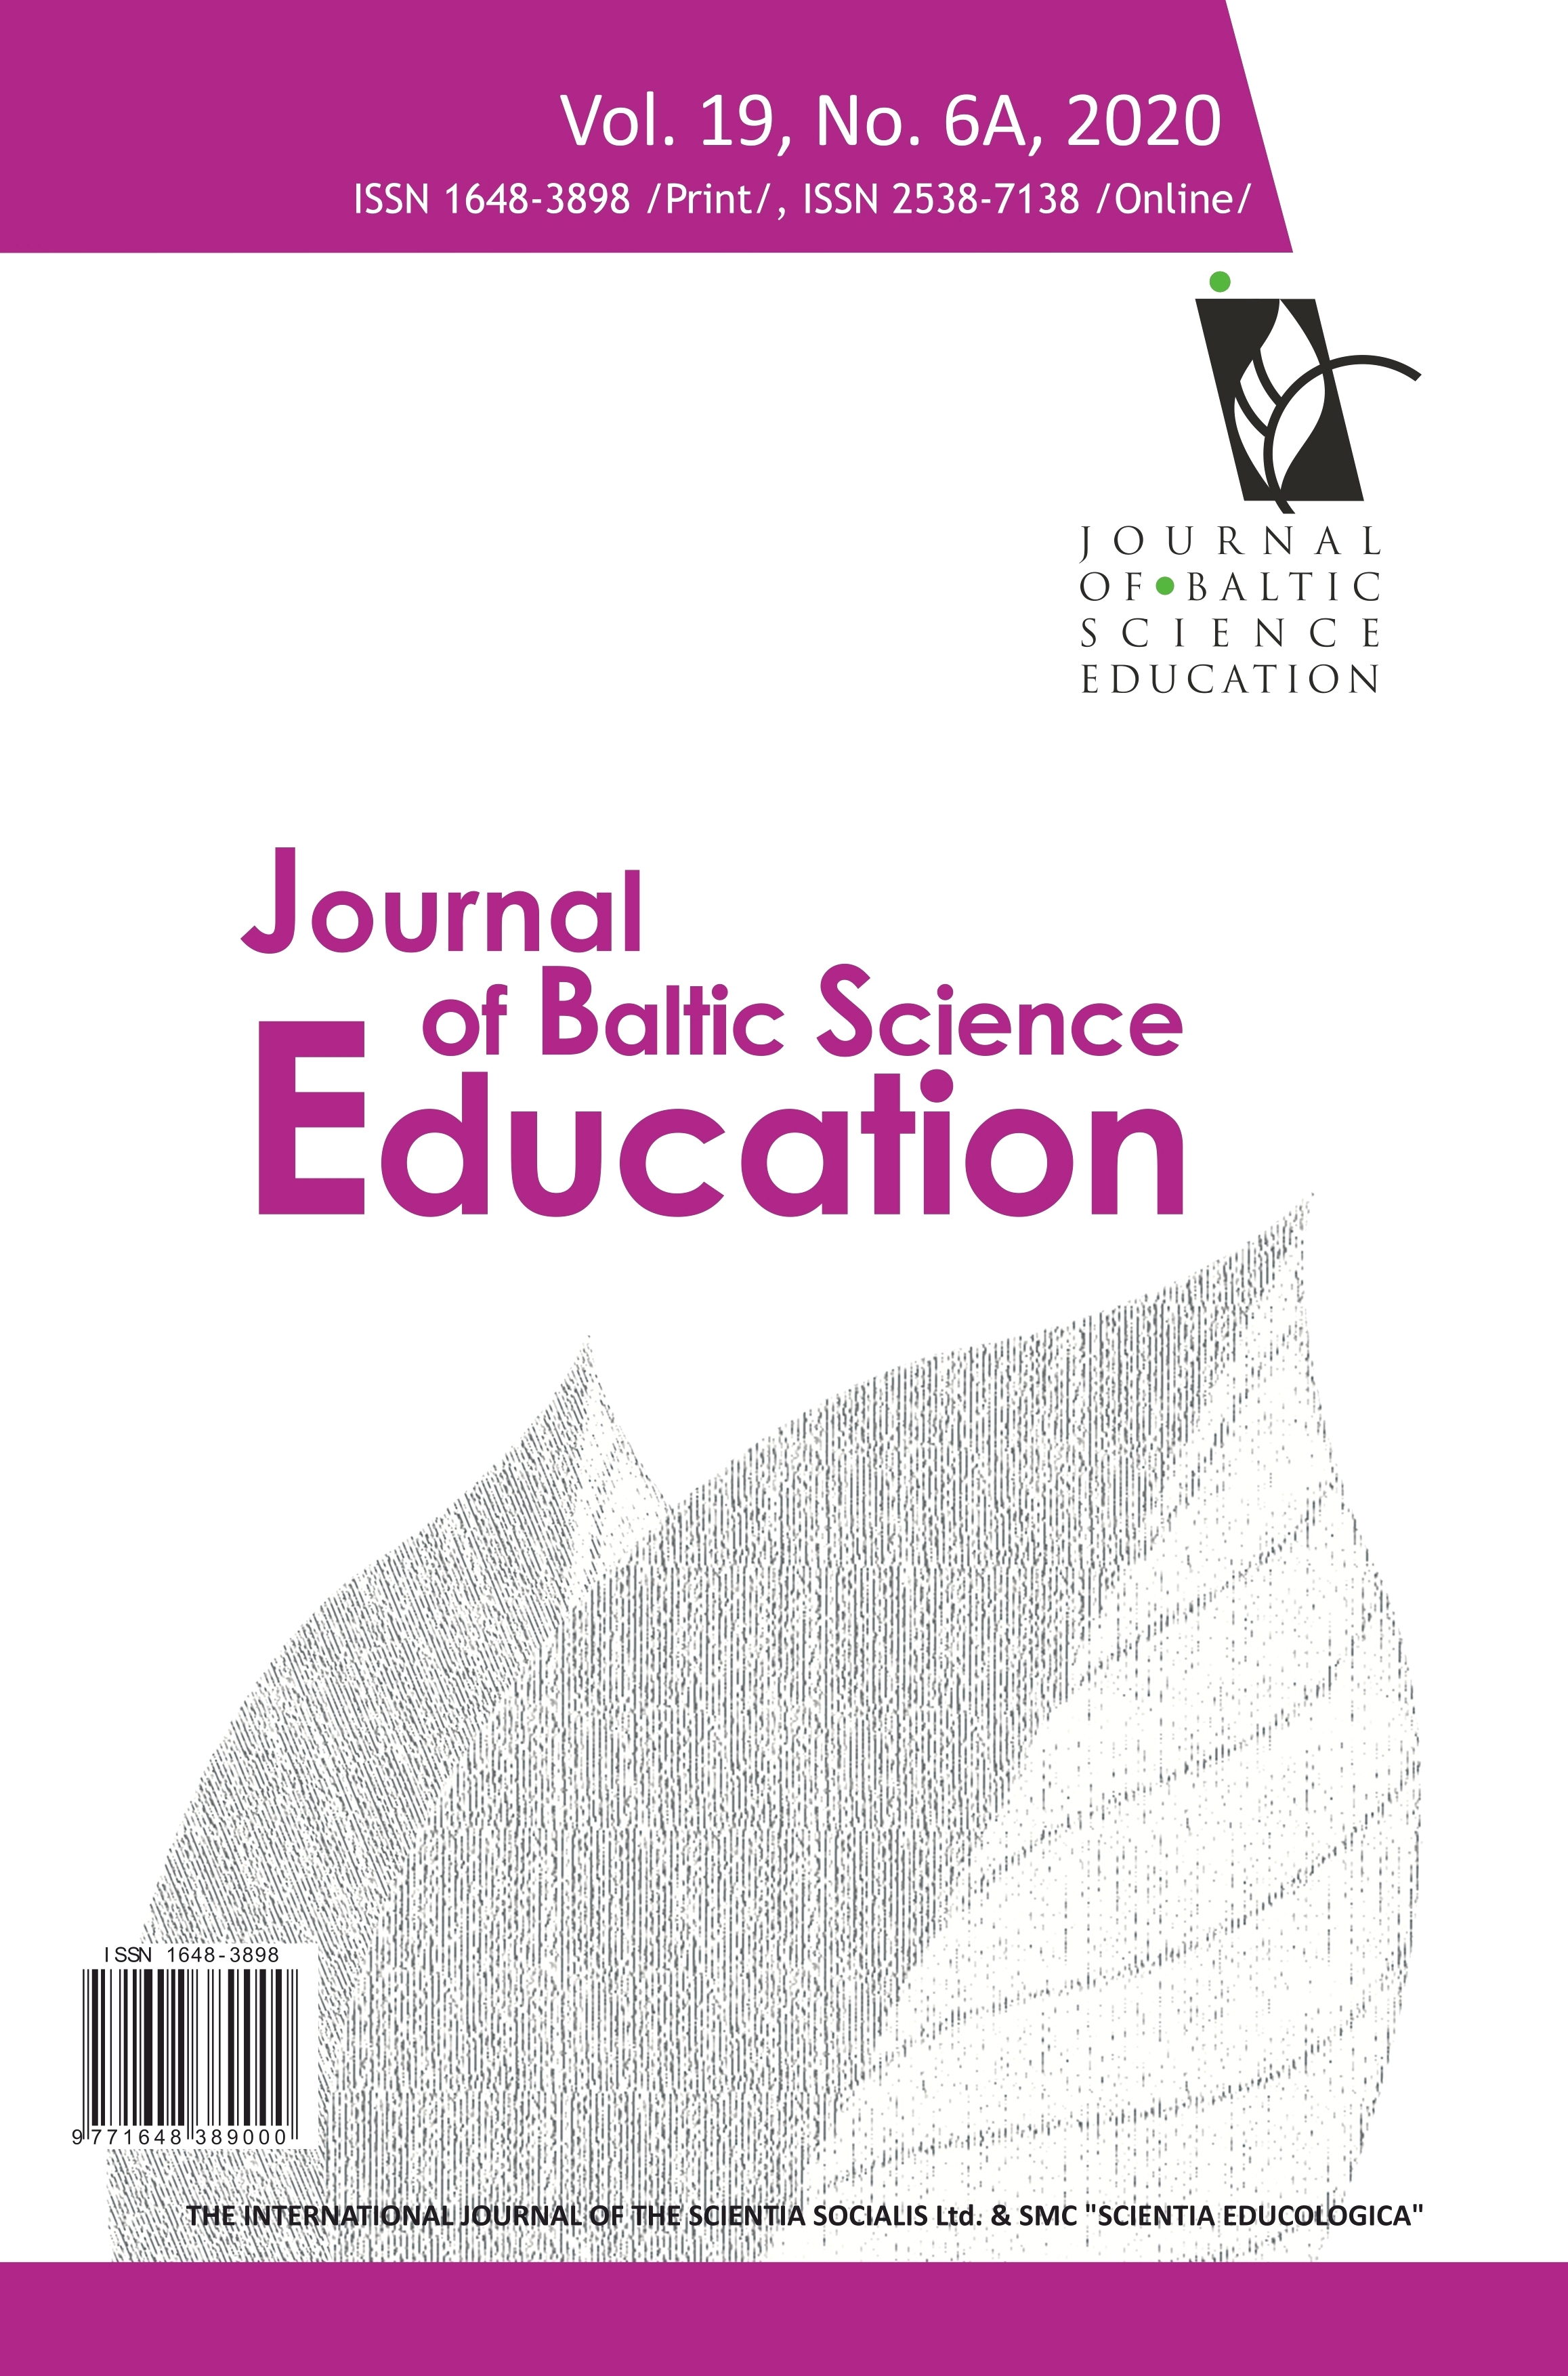 THE EFFECTS OF ONLINE TEACHING ON STUDENTS’ ACADEMIC PROGRESS IN STEM Cover Image